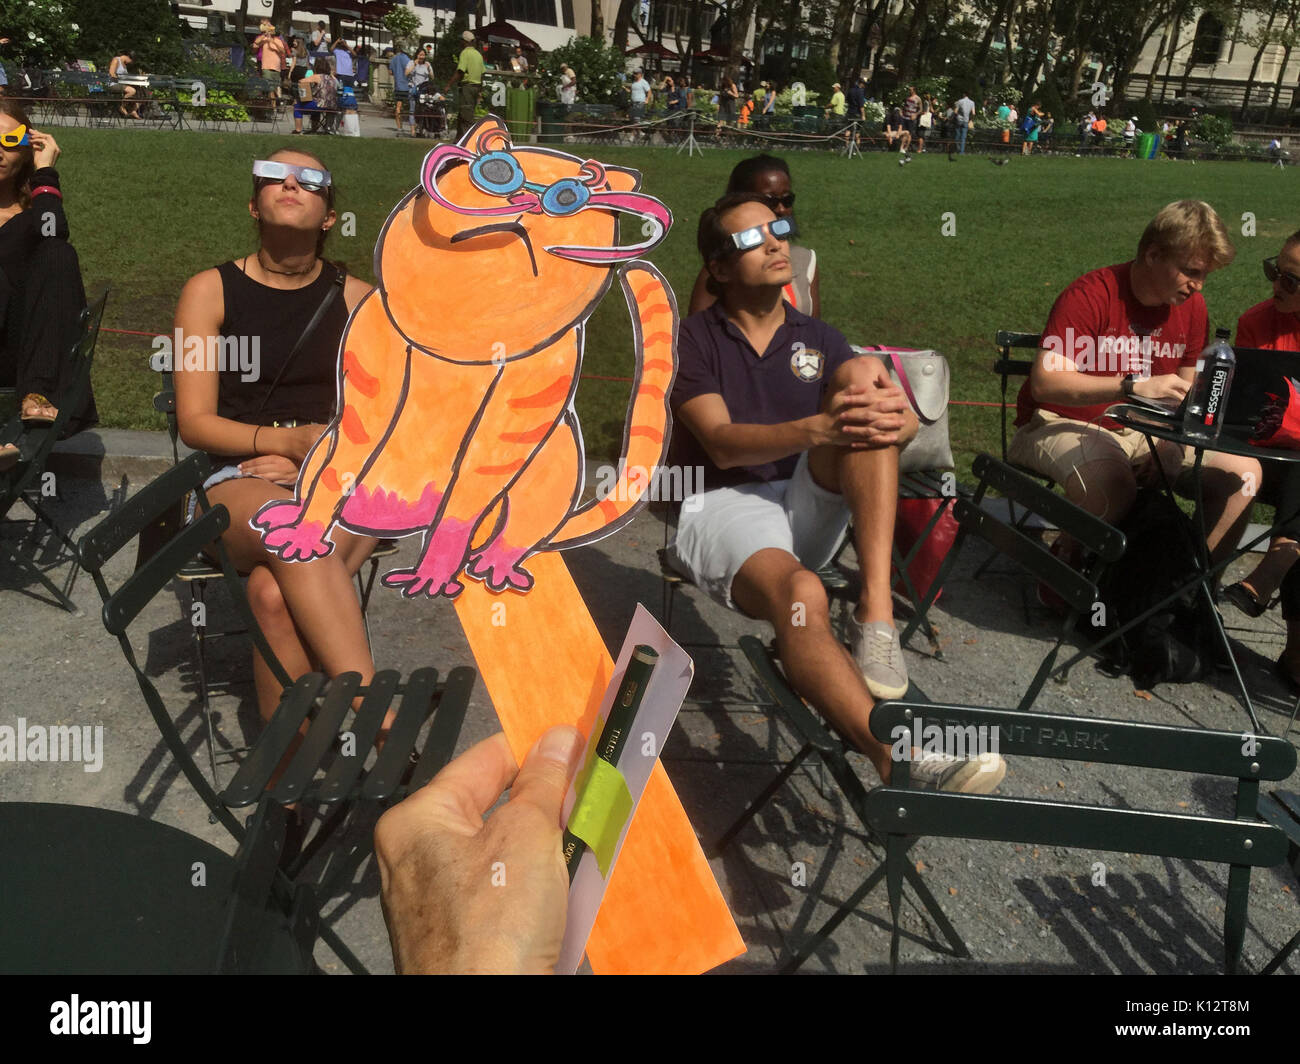 Thousands of the curious congregate in Bryant Park to watch the partial solar eclipse occurring in New York on Monday, August 21, 2017. New York City is not in the path of totality with the moon covering only almost 72 percent of the sun during the 2:44PM peak.  Eclipse Kat, drawn by Frances M. Roberts joins the crowds to watch the eclipse.  (© Frances M. Roberts) Illustration Stock Photo